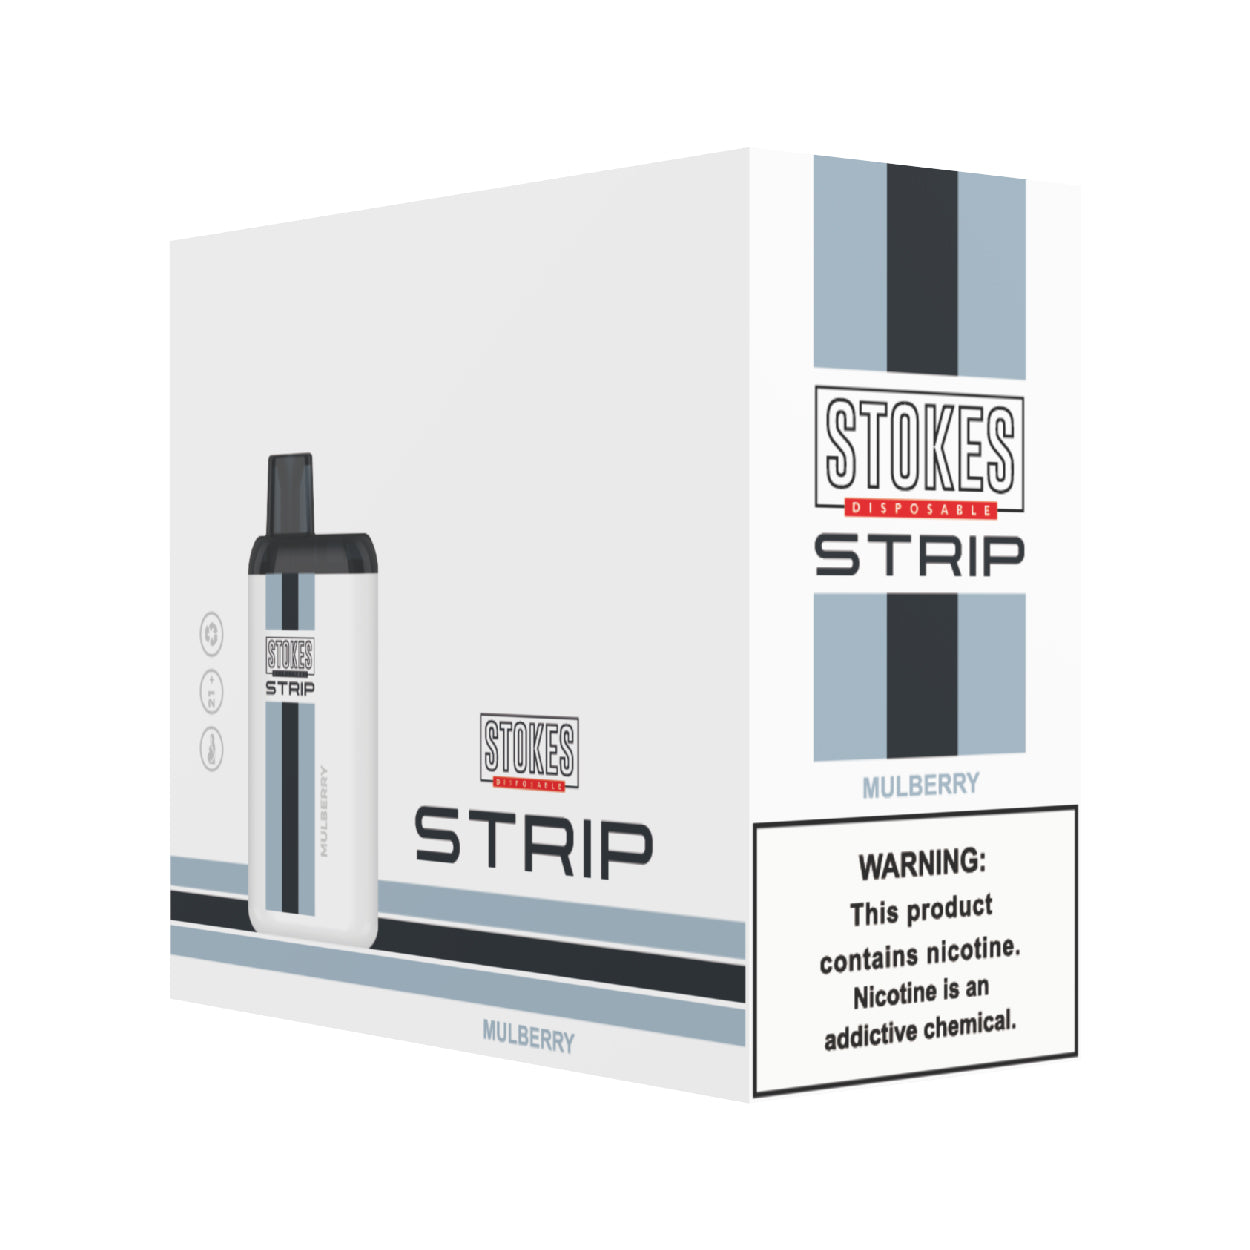 STOKES Strip - 5% Nic. (Disposable Device) - 4000 Puffs - Mulberry